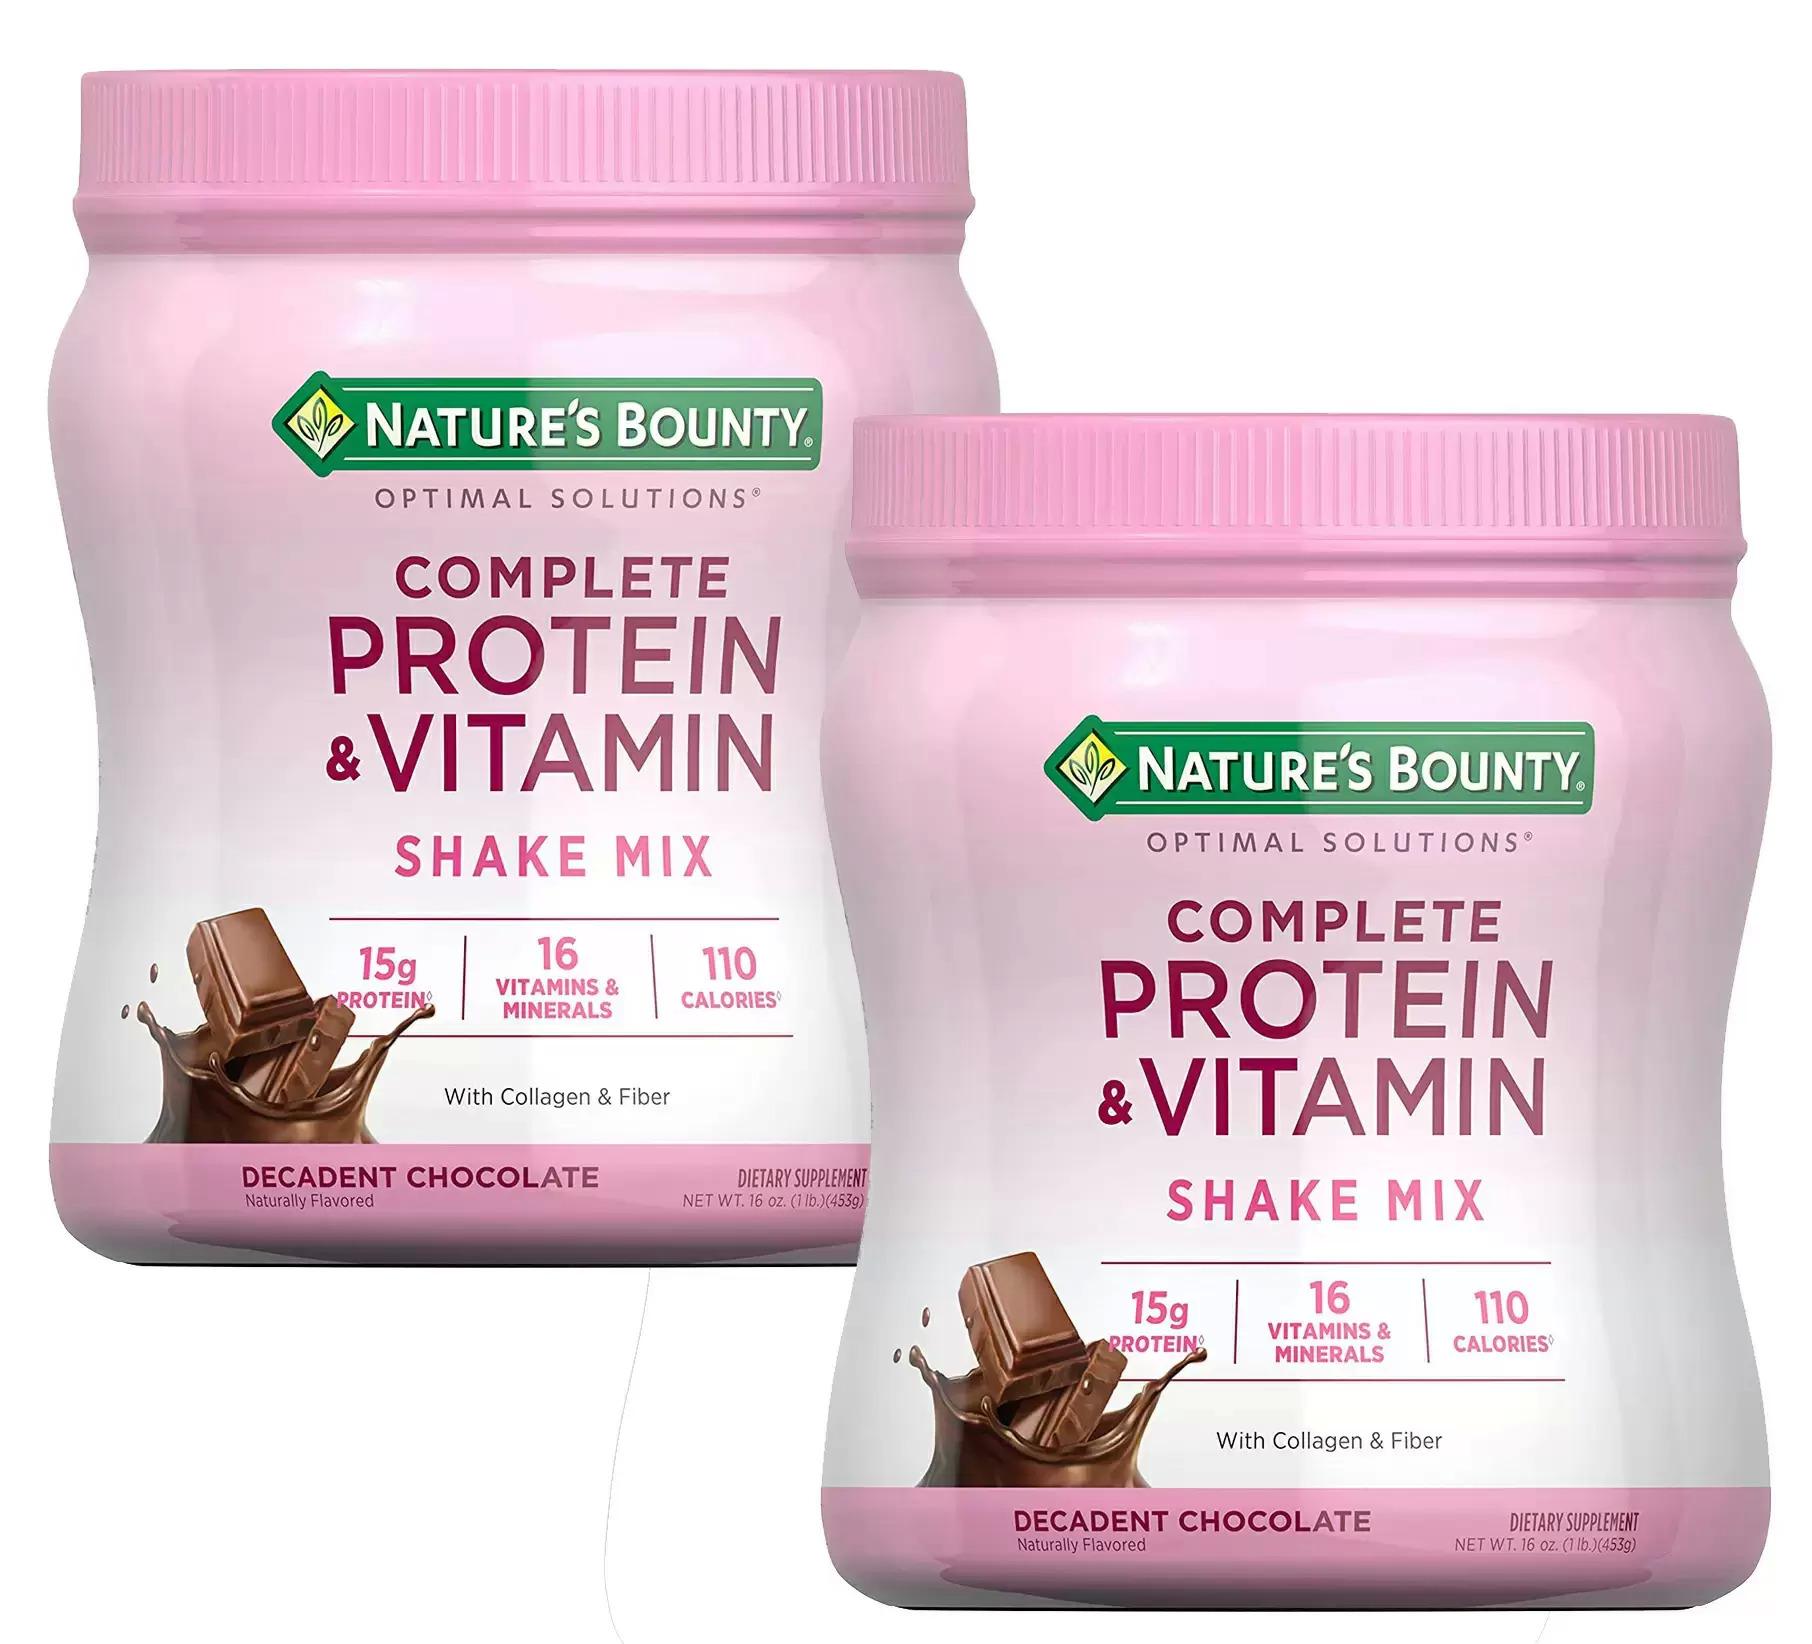 Natures Bounty Complete Protein and Vitamin Chocolate Shake Mix for $11.49 Shipped